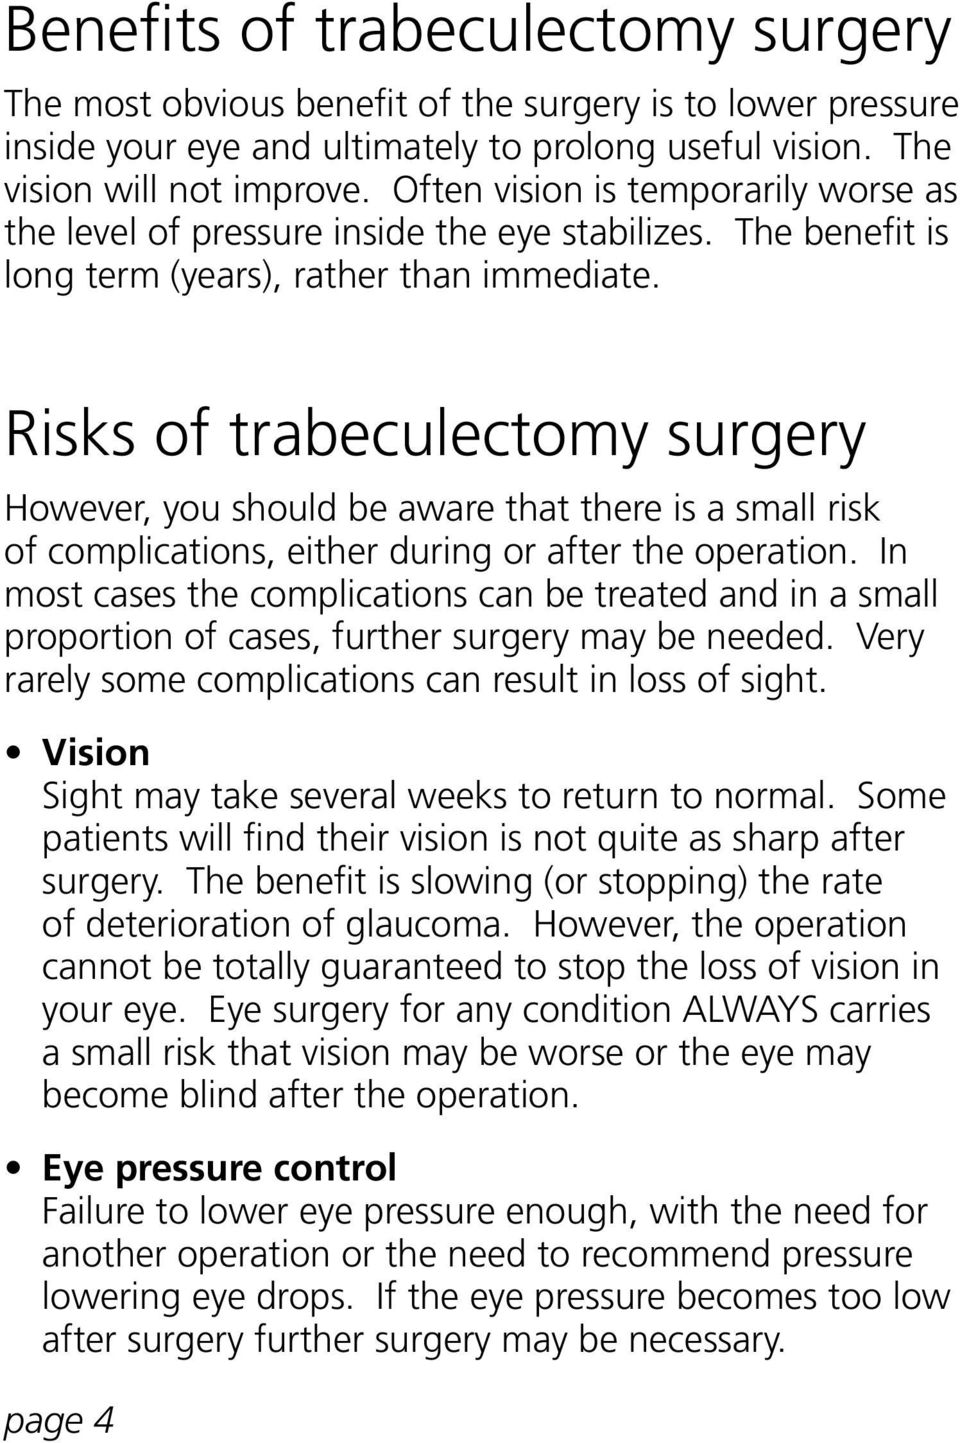 Risks of trabeculectomy surgery However, you should be aware that there is a small risk of complications, either during or after the operation.